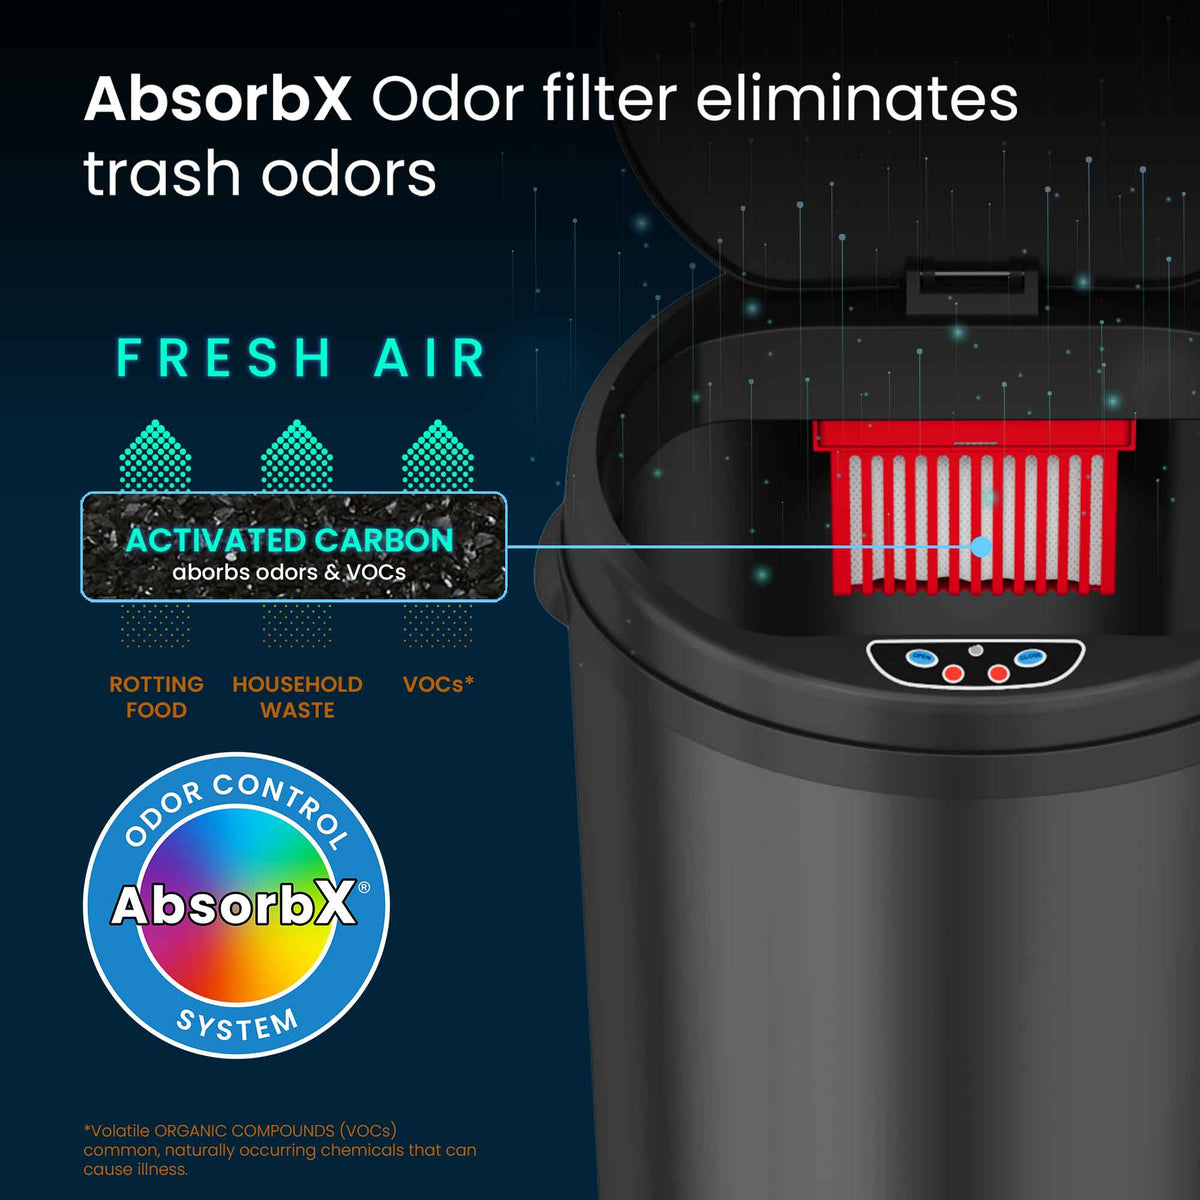 iTouchless 8 Gallon Black Stainless Steel Sensor Trash Can with Odor Filter AbsorbX Odor Filter eliminates trash odors